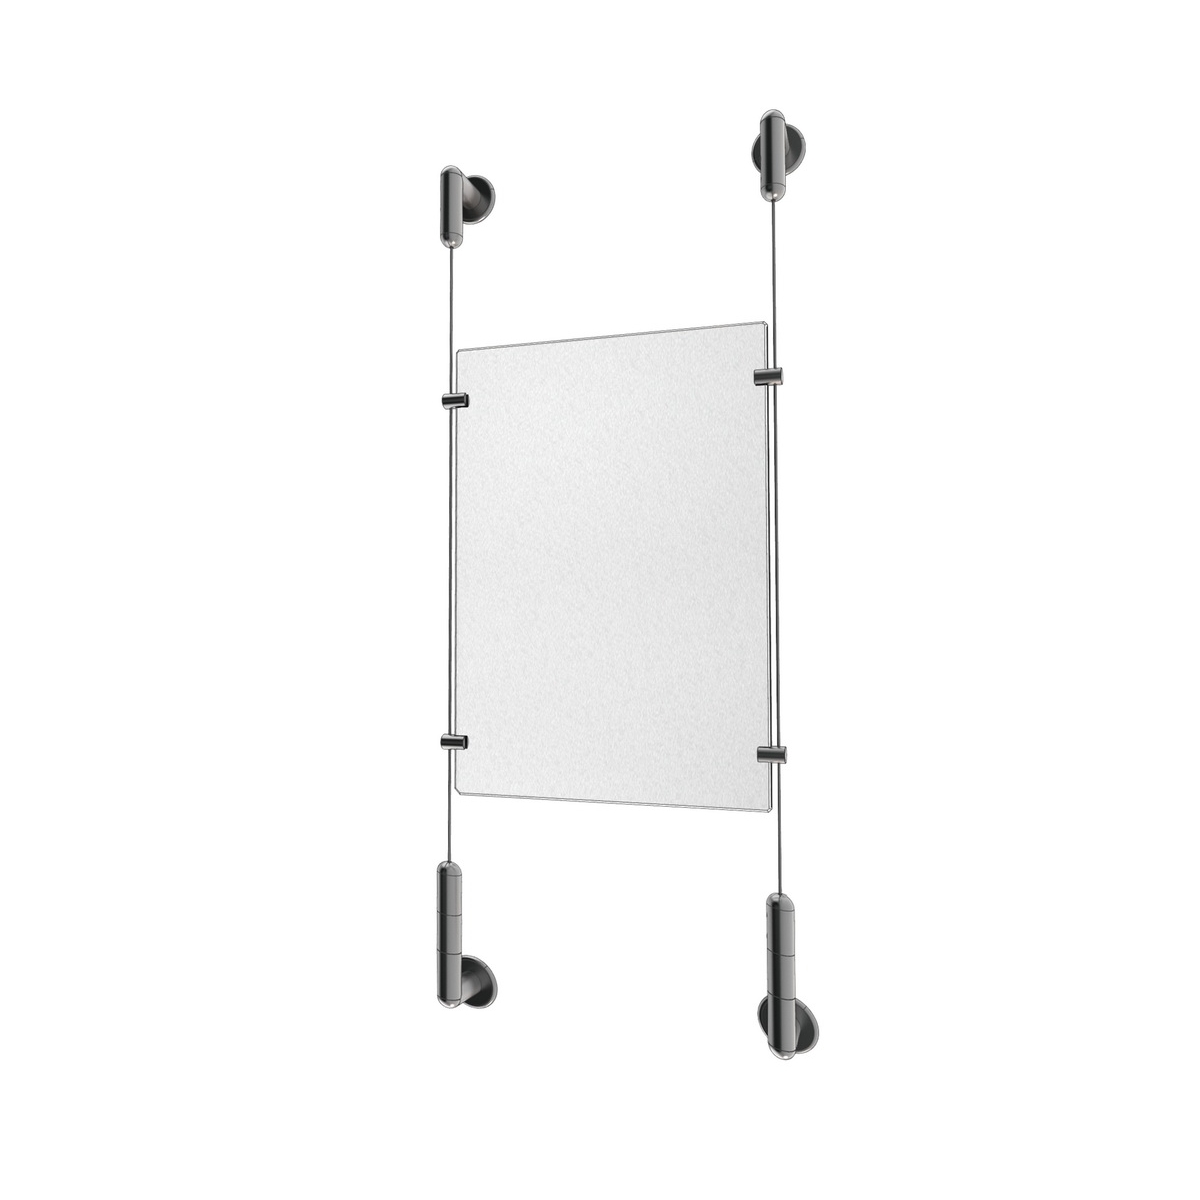 Clear Acrylic Sign Holder Kit for Media 1 x 8.5'' x 11''